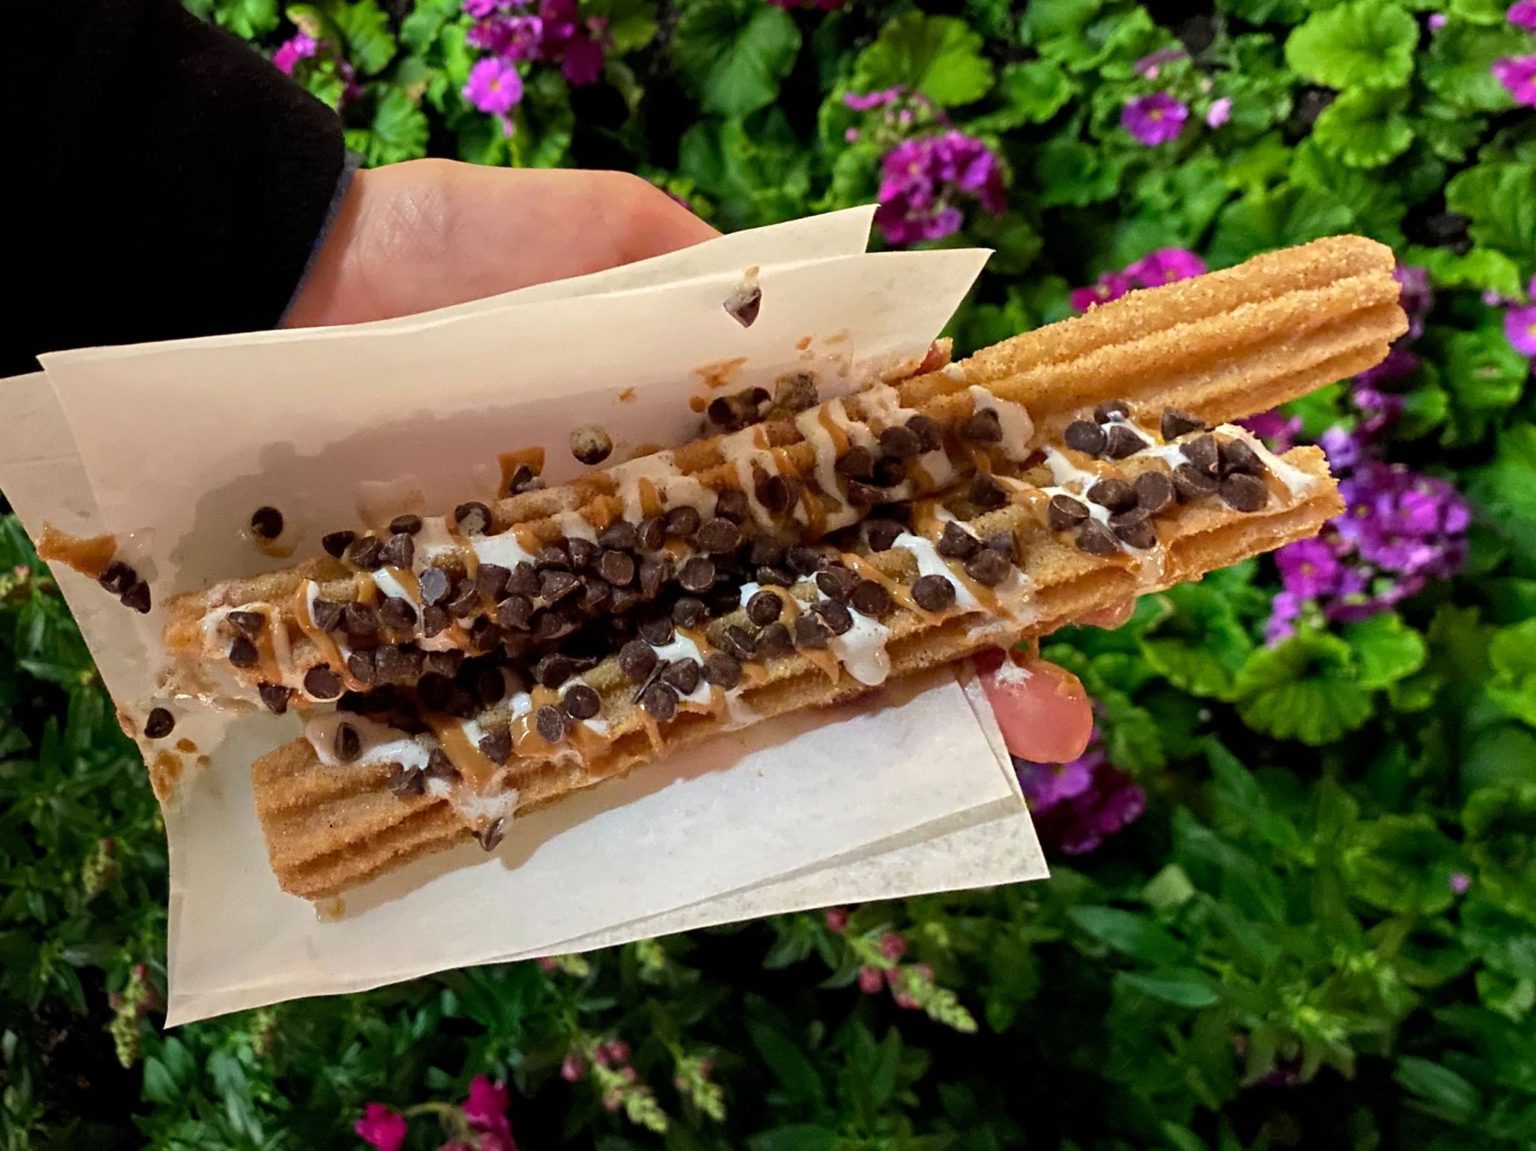 REVIEW New Fluffernutter Churro at Willie's Churros Food at Disneyland